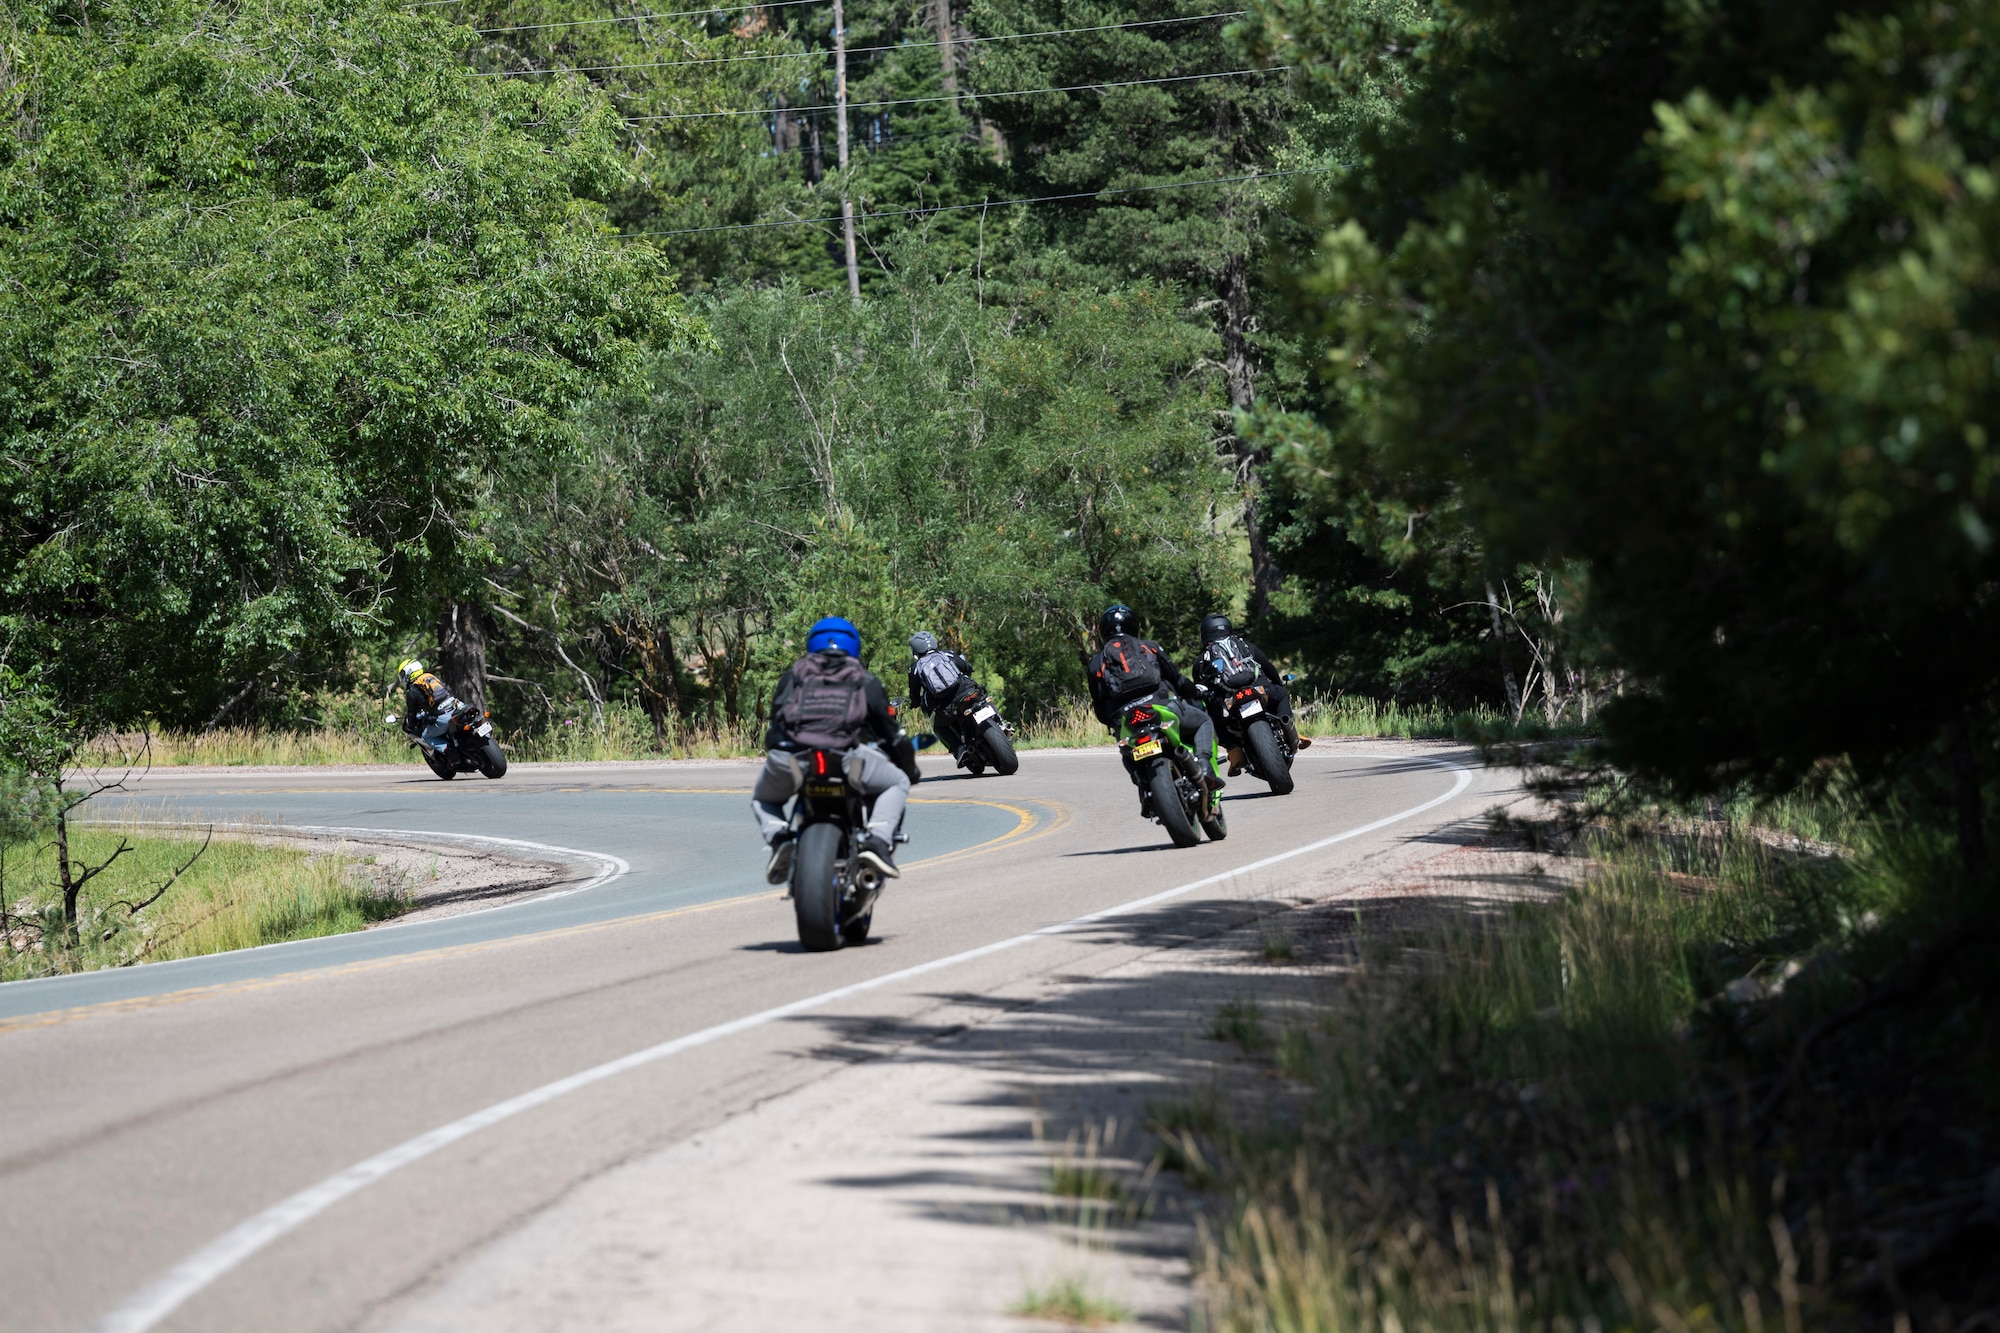 Airmen from Holloman travel through Ruidoso on their motorcycles during a group mentorship ride near Holloman Air Force Base, New Mexico, July 21, 2023. Mentorship rides allow commanders to coordinate counseling and inspections of riders to ensure their motorcycles are safe to operate and they possess serviceable safety equipment. (U.S. Air Force photo by Airman 1st Class Michelle Ferrari)